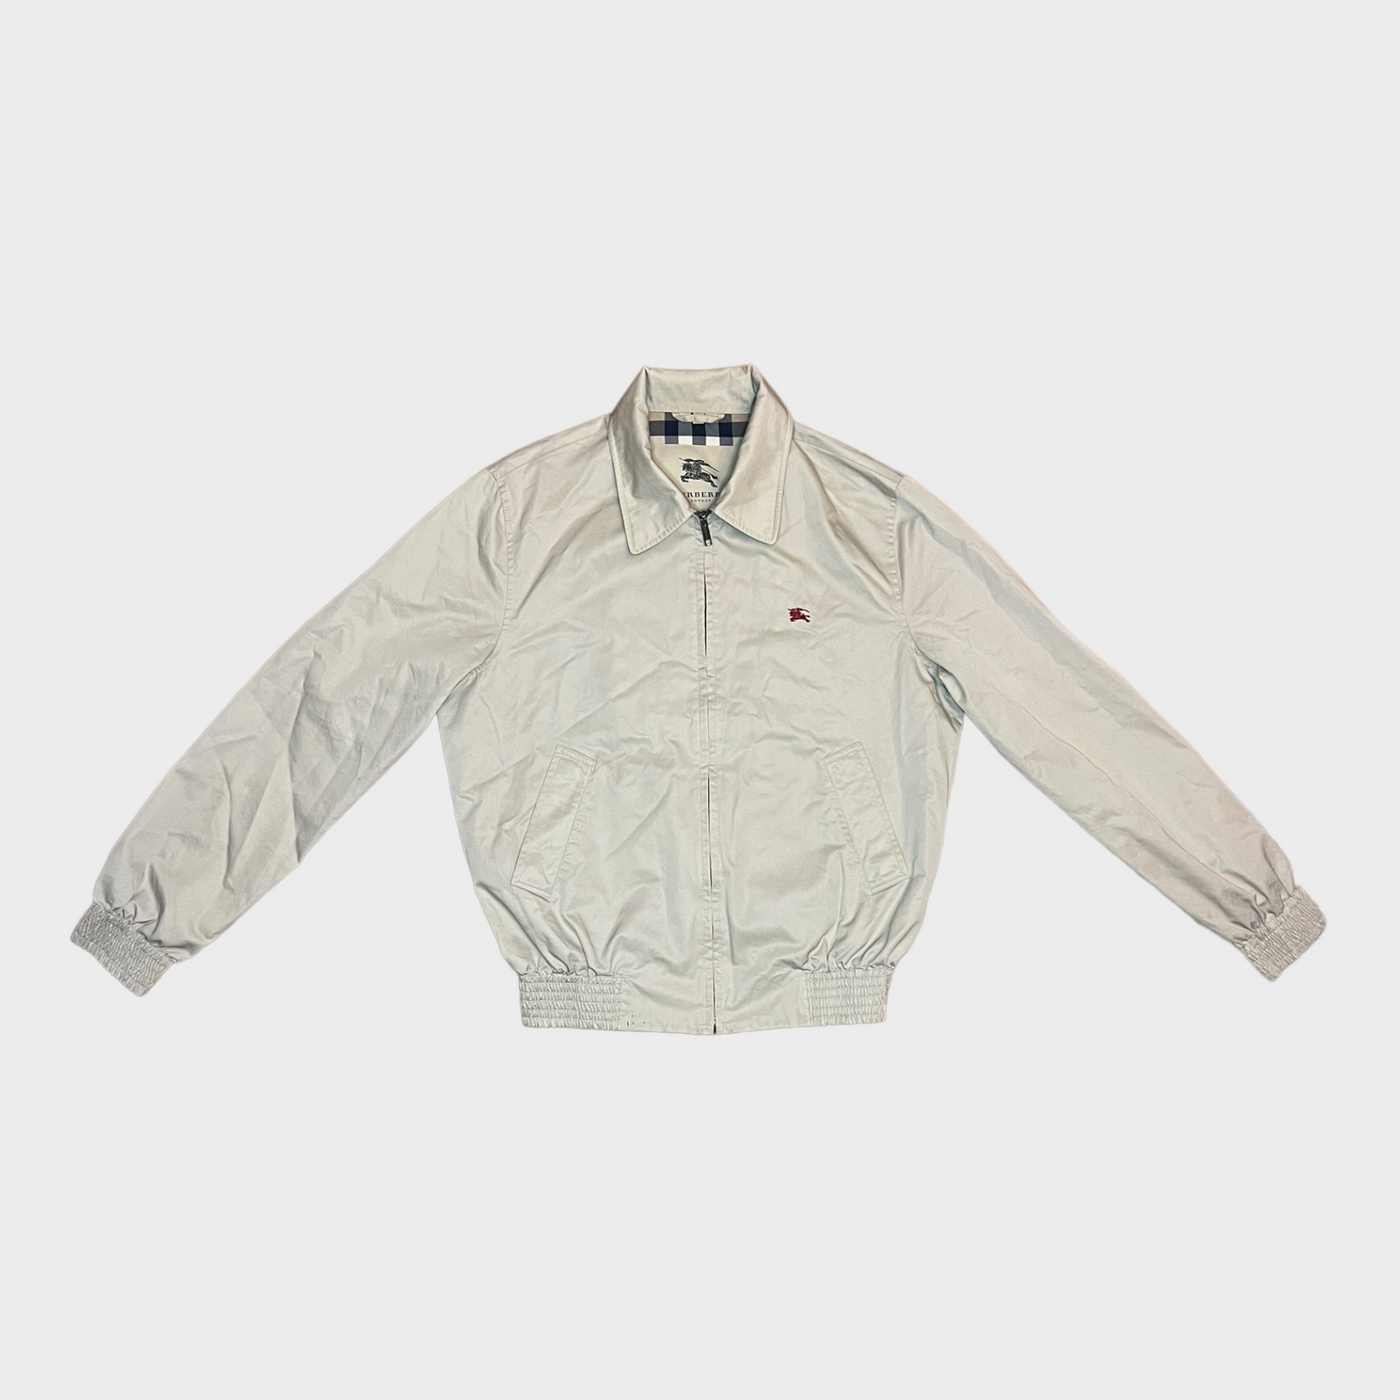 Front of the BURBERRY Short Jacket in an light cream white color.